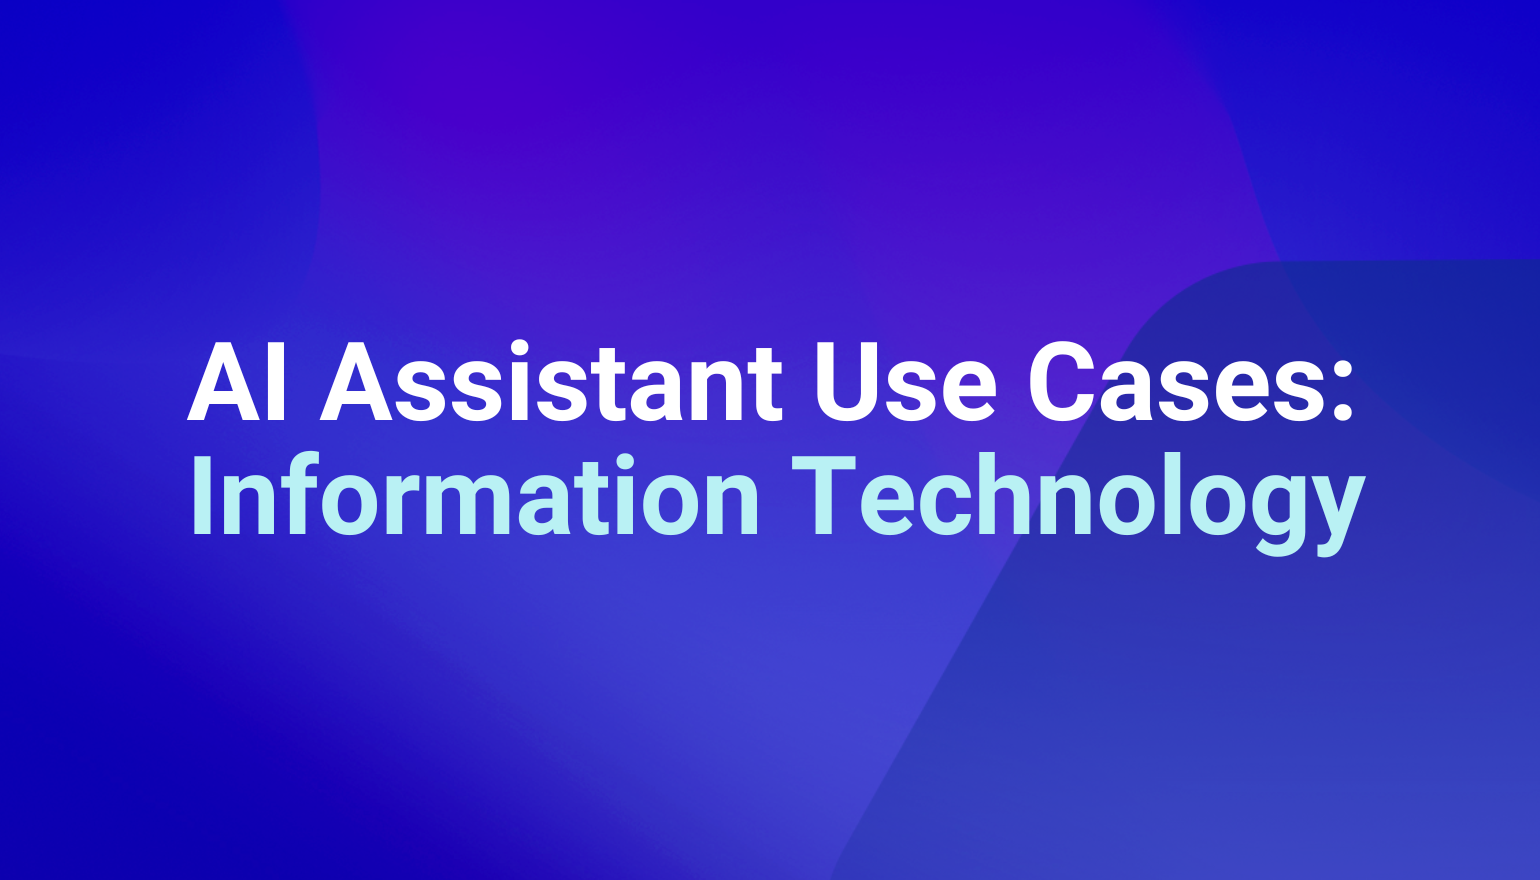 AI Assistant use cases for Information Technology teams